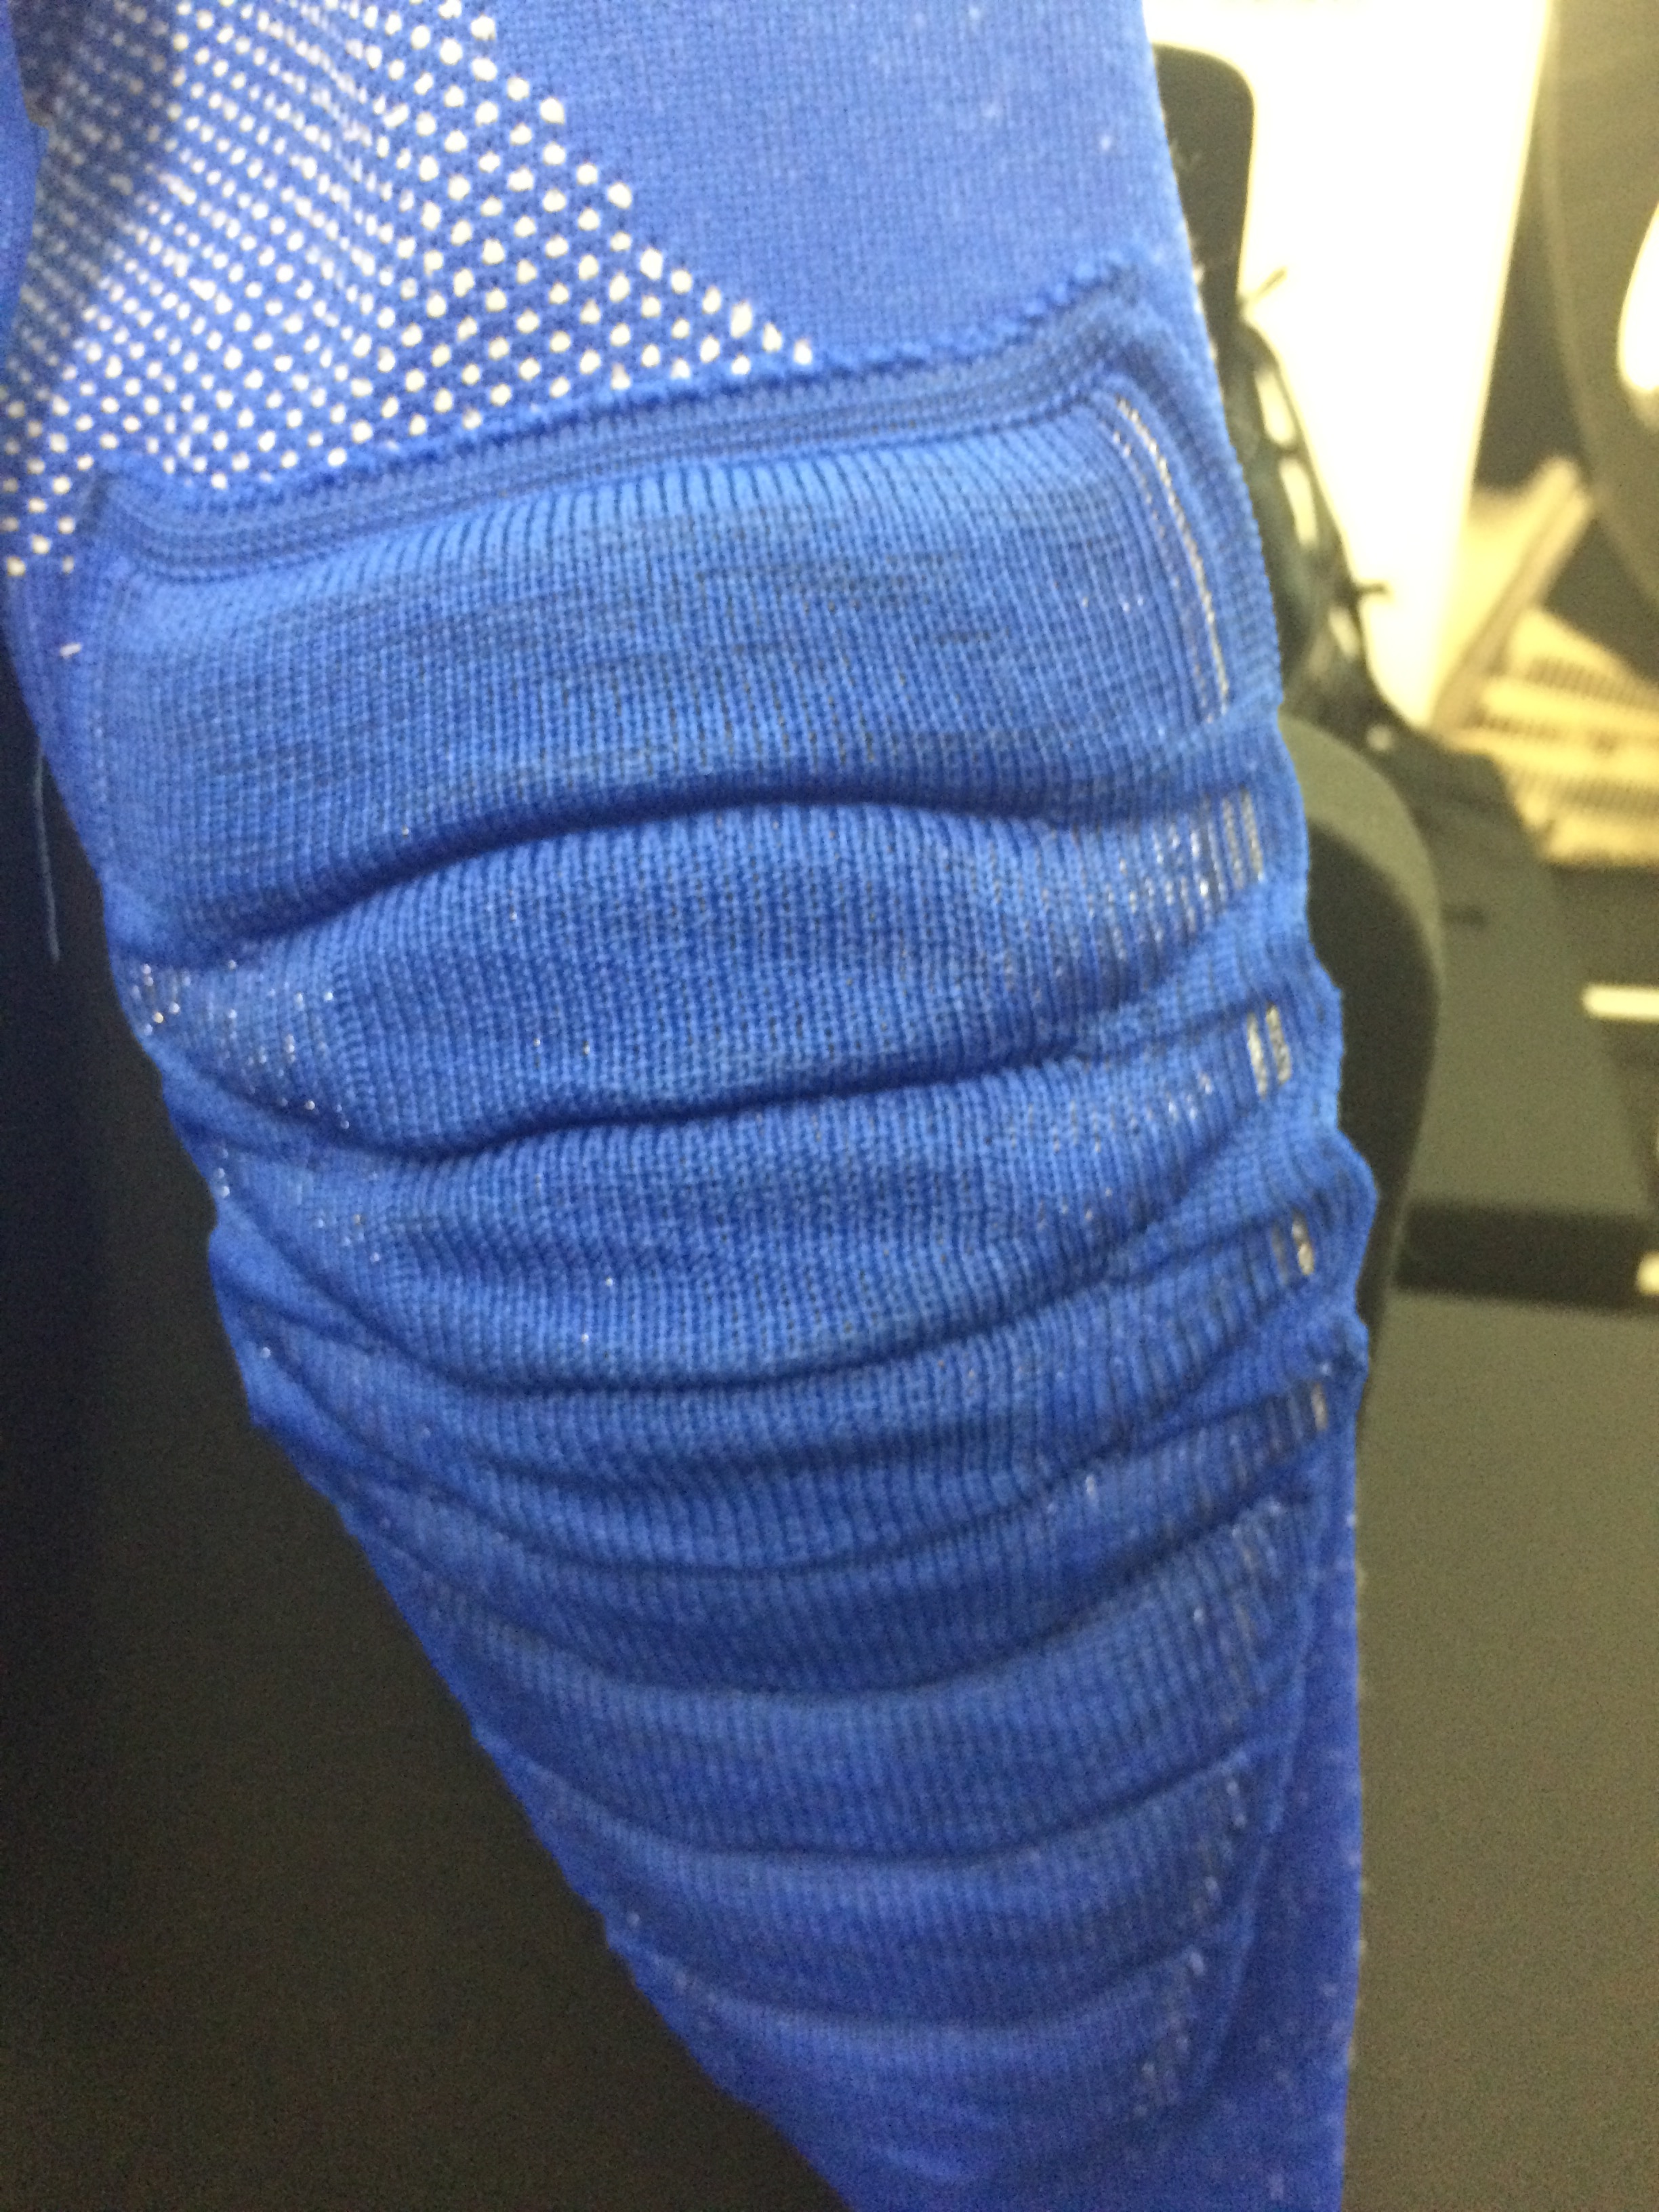 Arm detail from R.ABS Rapid Knitted Shock Absorber garment.